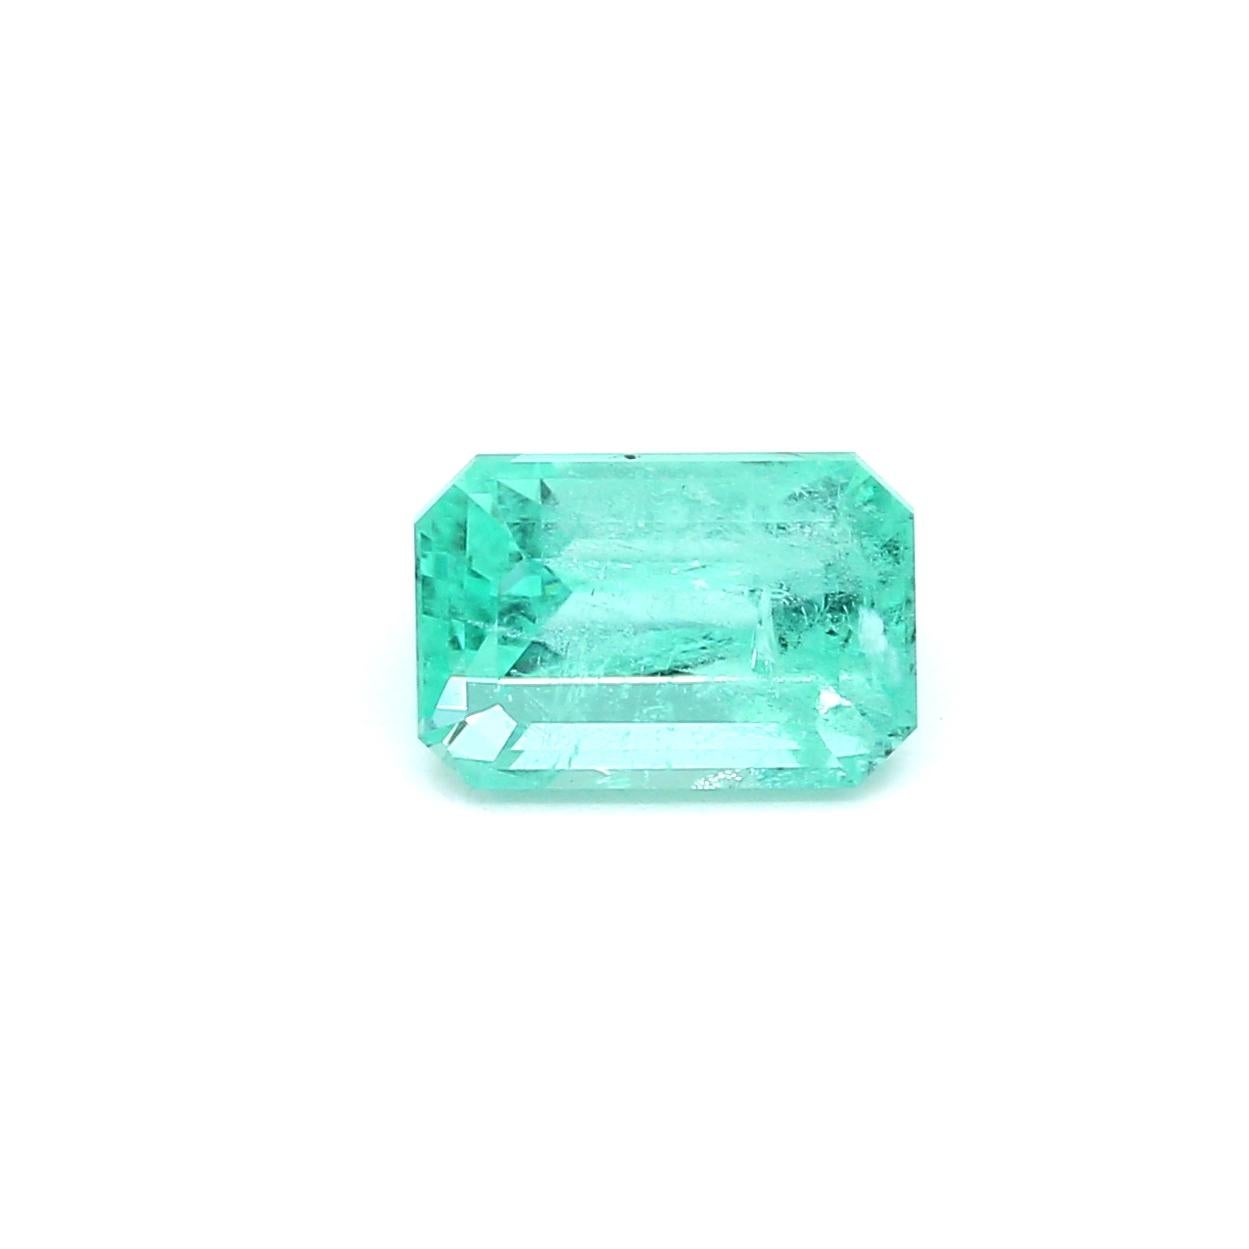 An amazing Russian Emerald which allows jewelers to create a unique piece of wearable art.
This exceptional quality gemstone would make a custom-made jewelry design. Perfect for a Ring or Pendant.

Shape - Octagon
Weight - 2.13 ct
Treatment